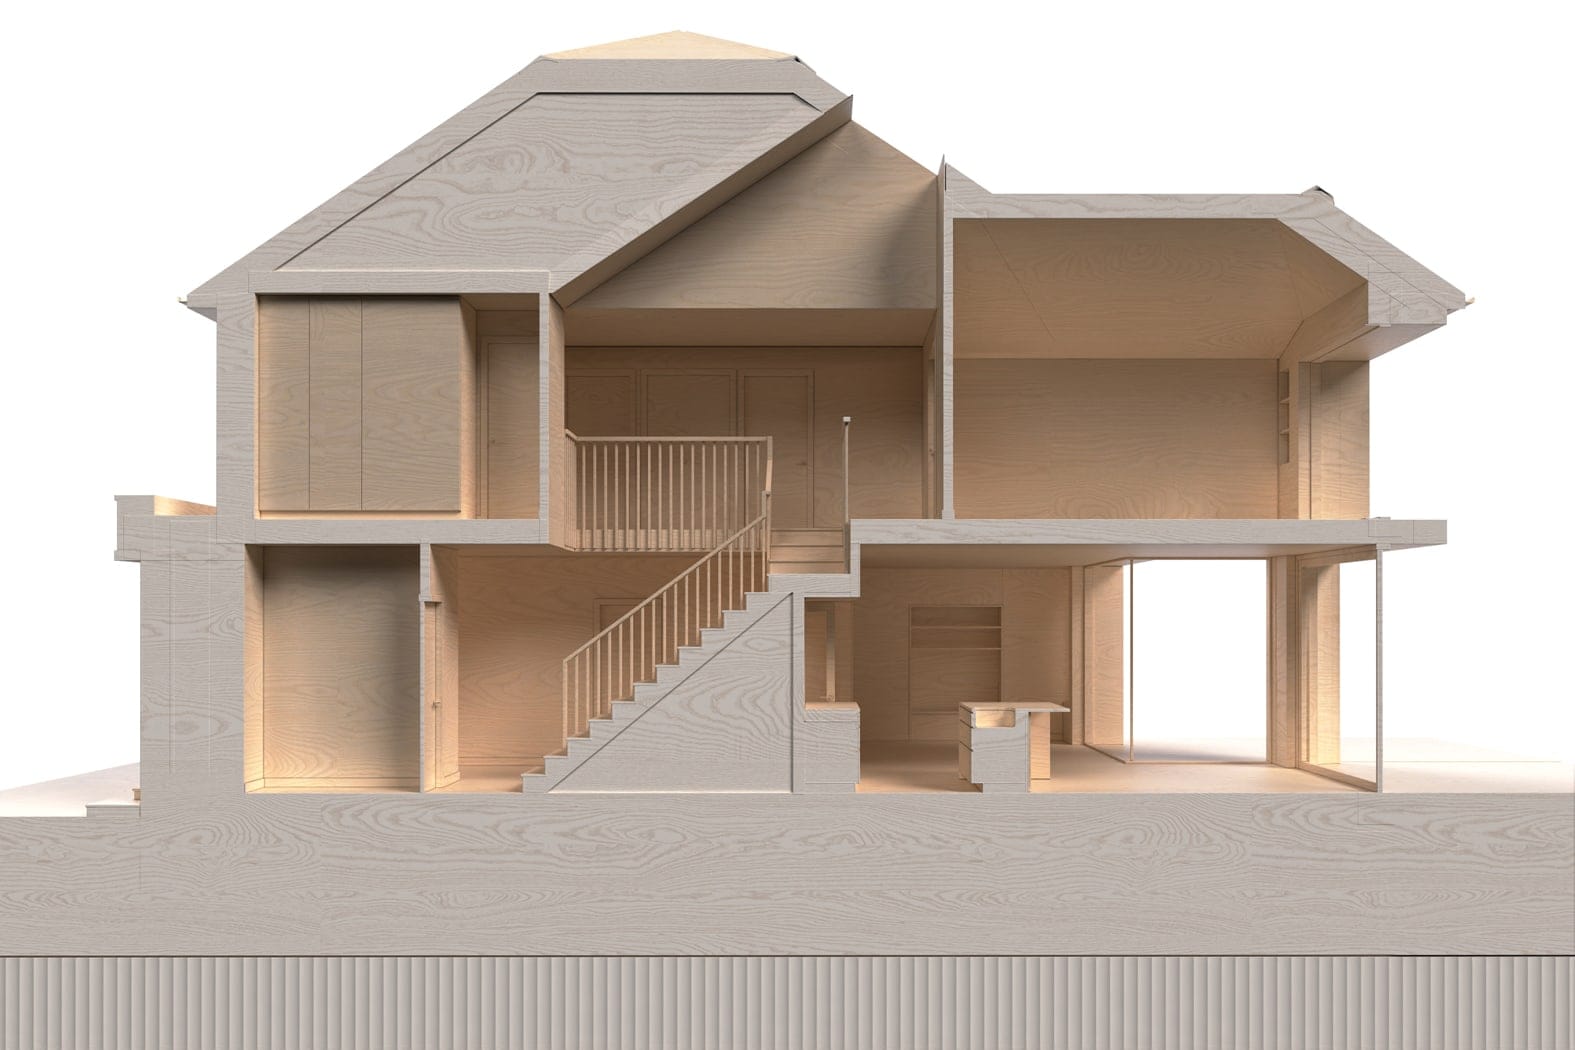 Glenageary House Cross-sectional View